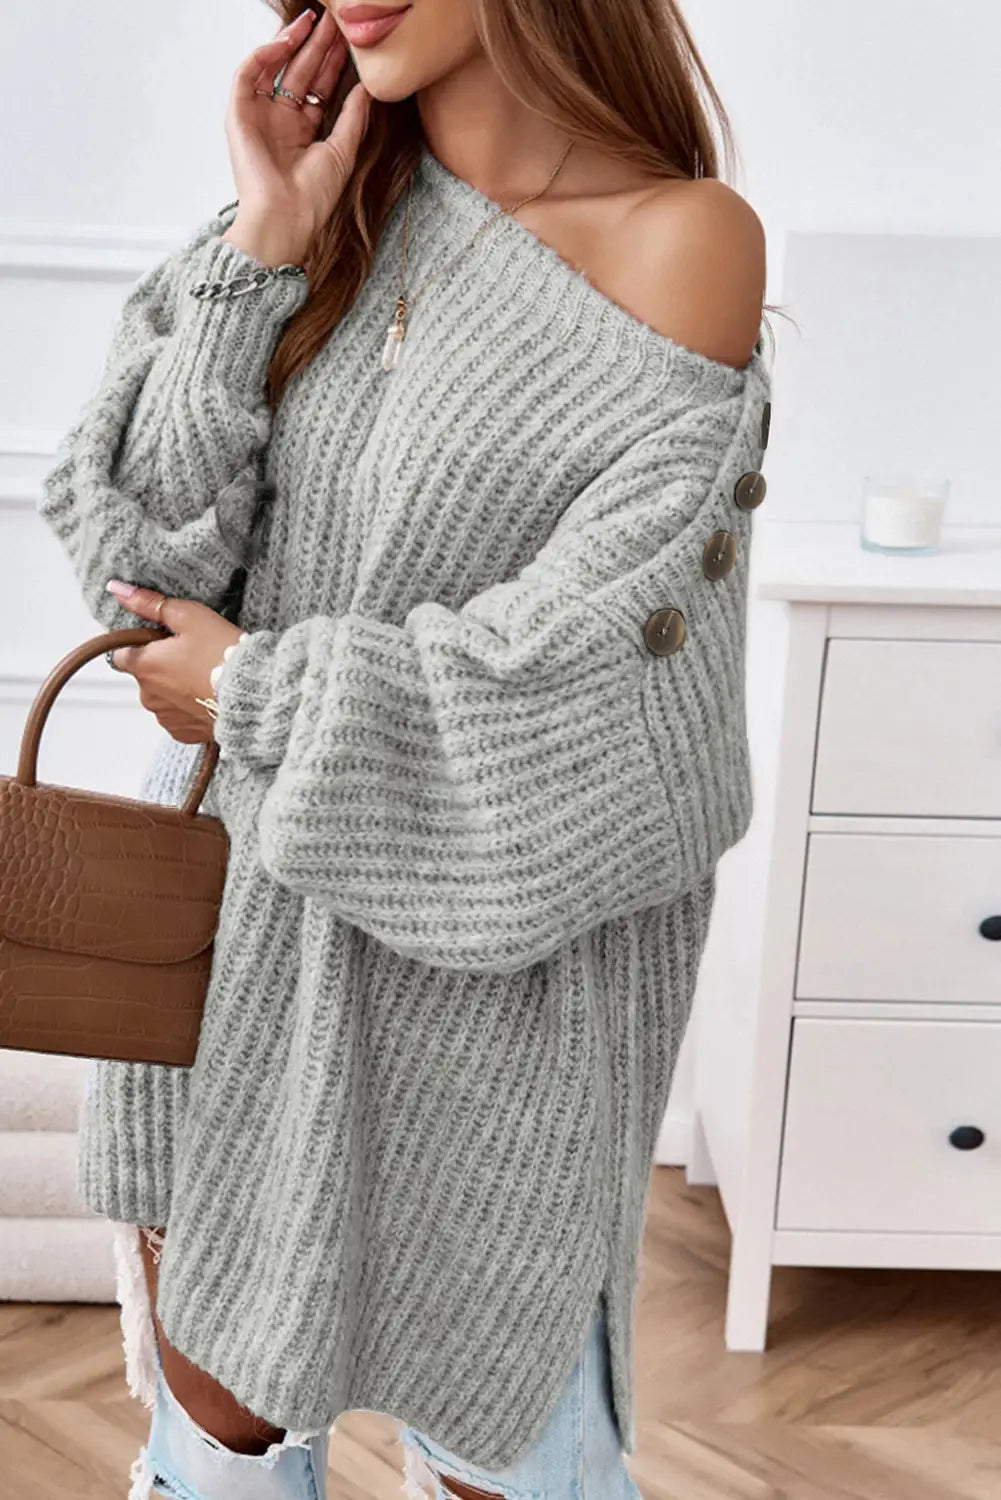 Gray buttoned drop shoulder oversized sweater - sweaters & cardigans